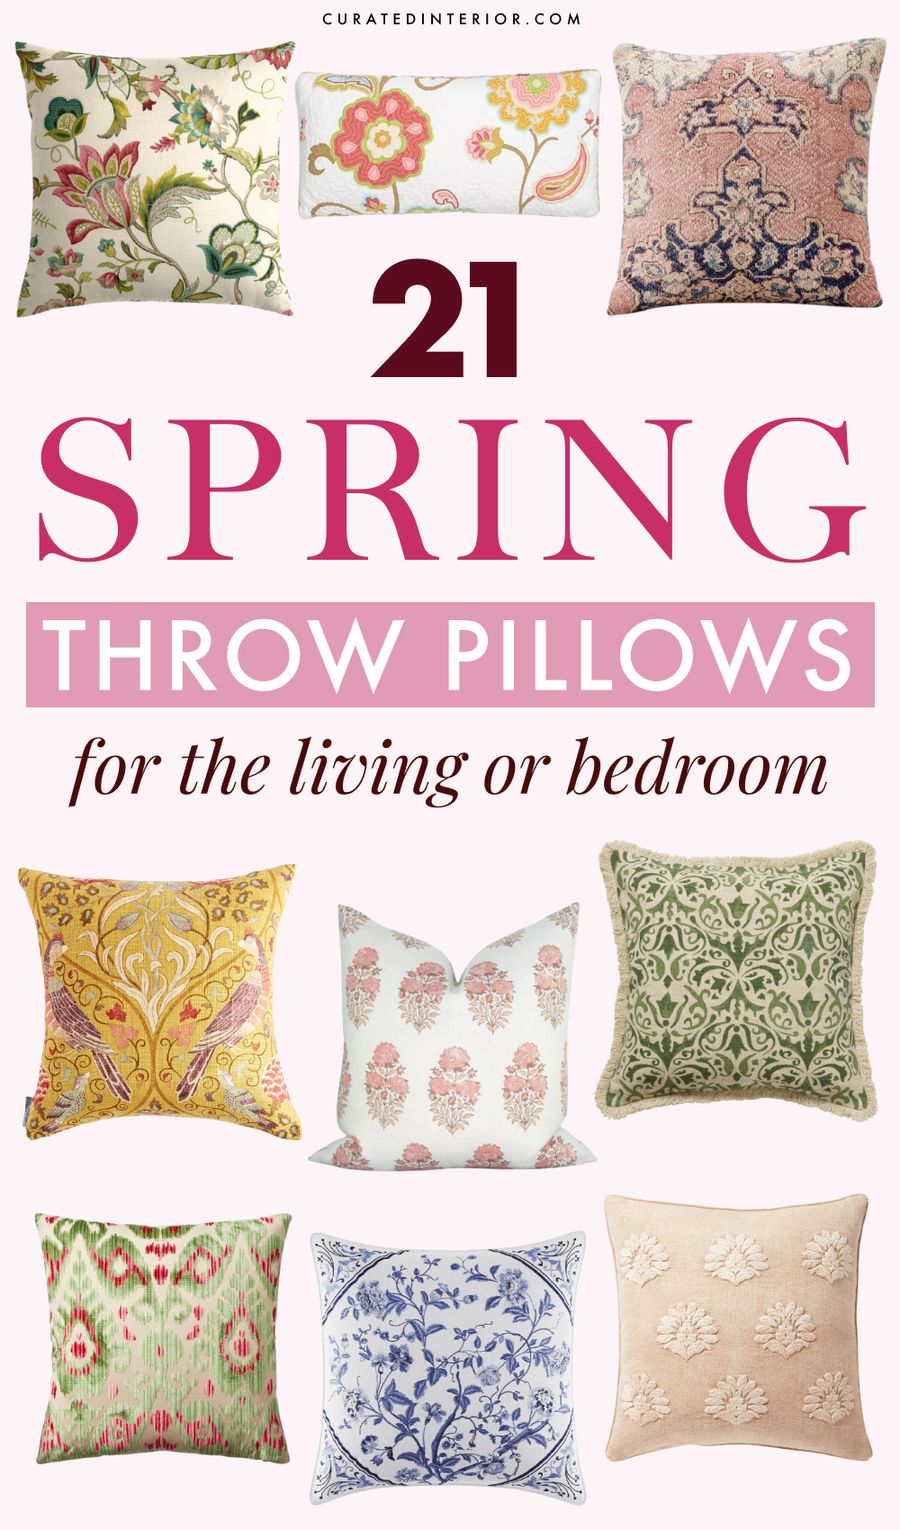 21 Spring Throw Pillows for the Living Room or Bedroom